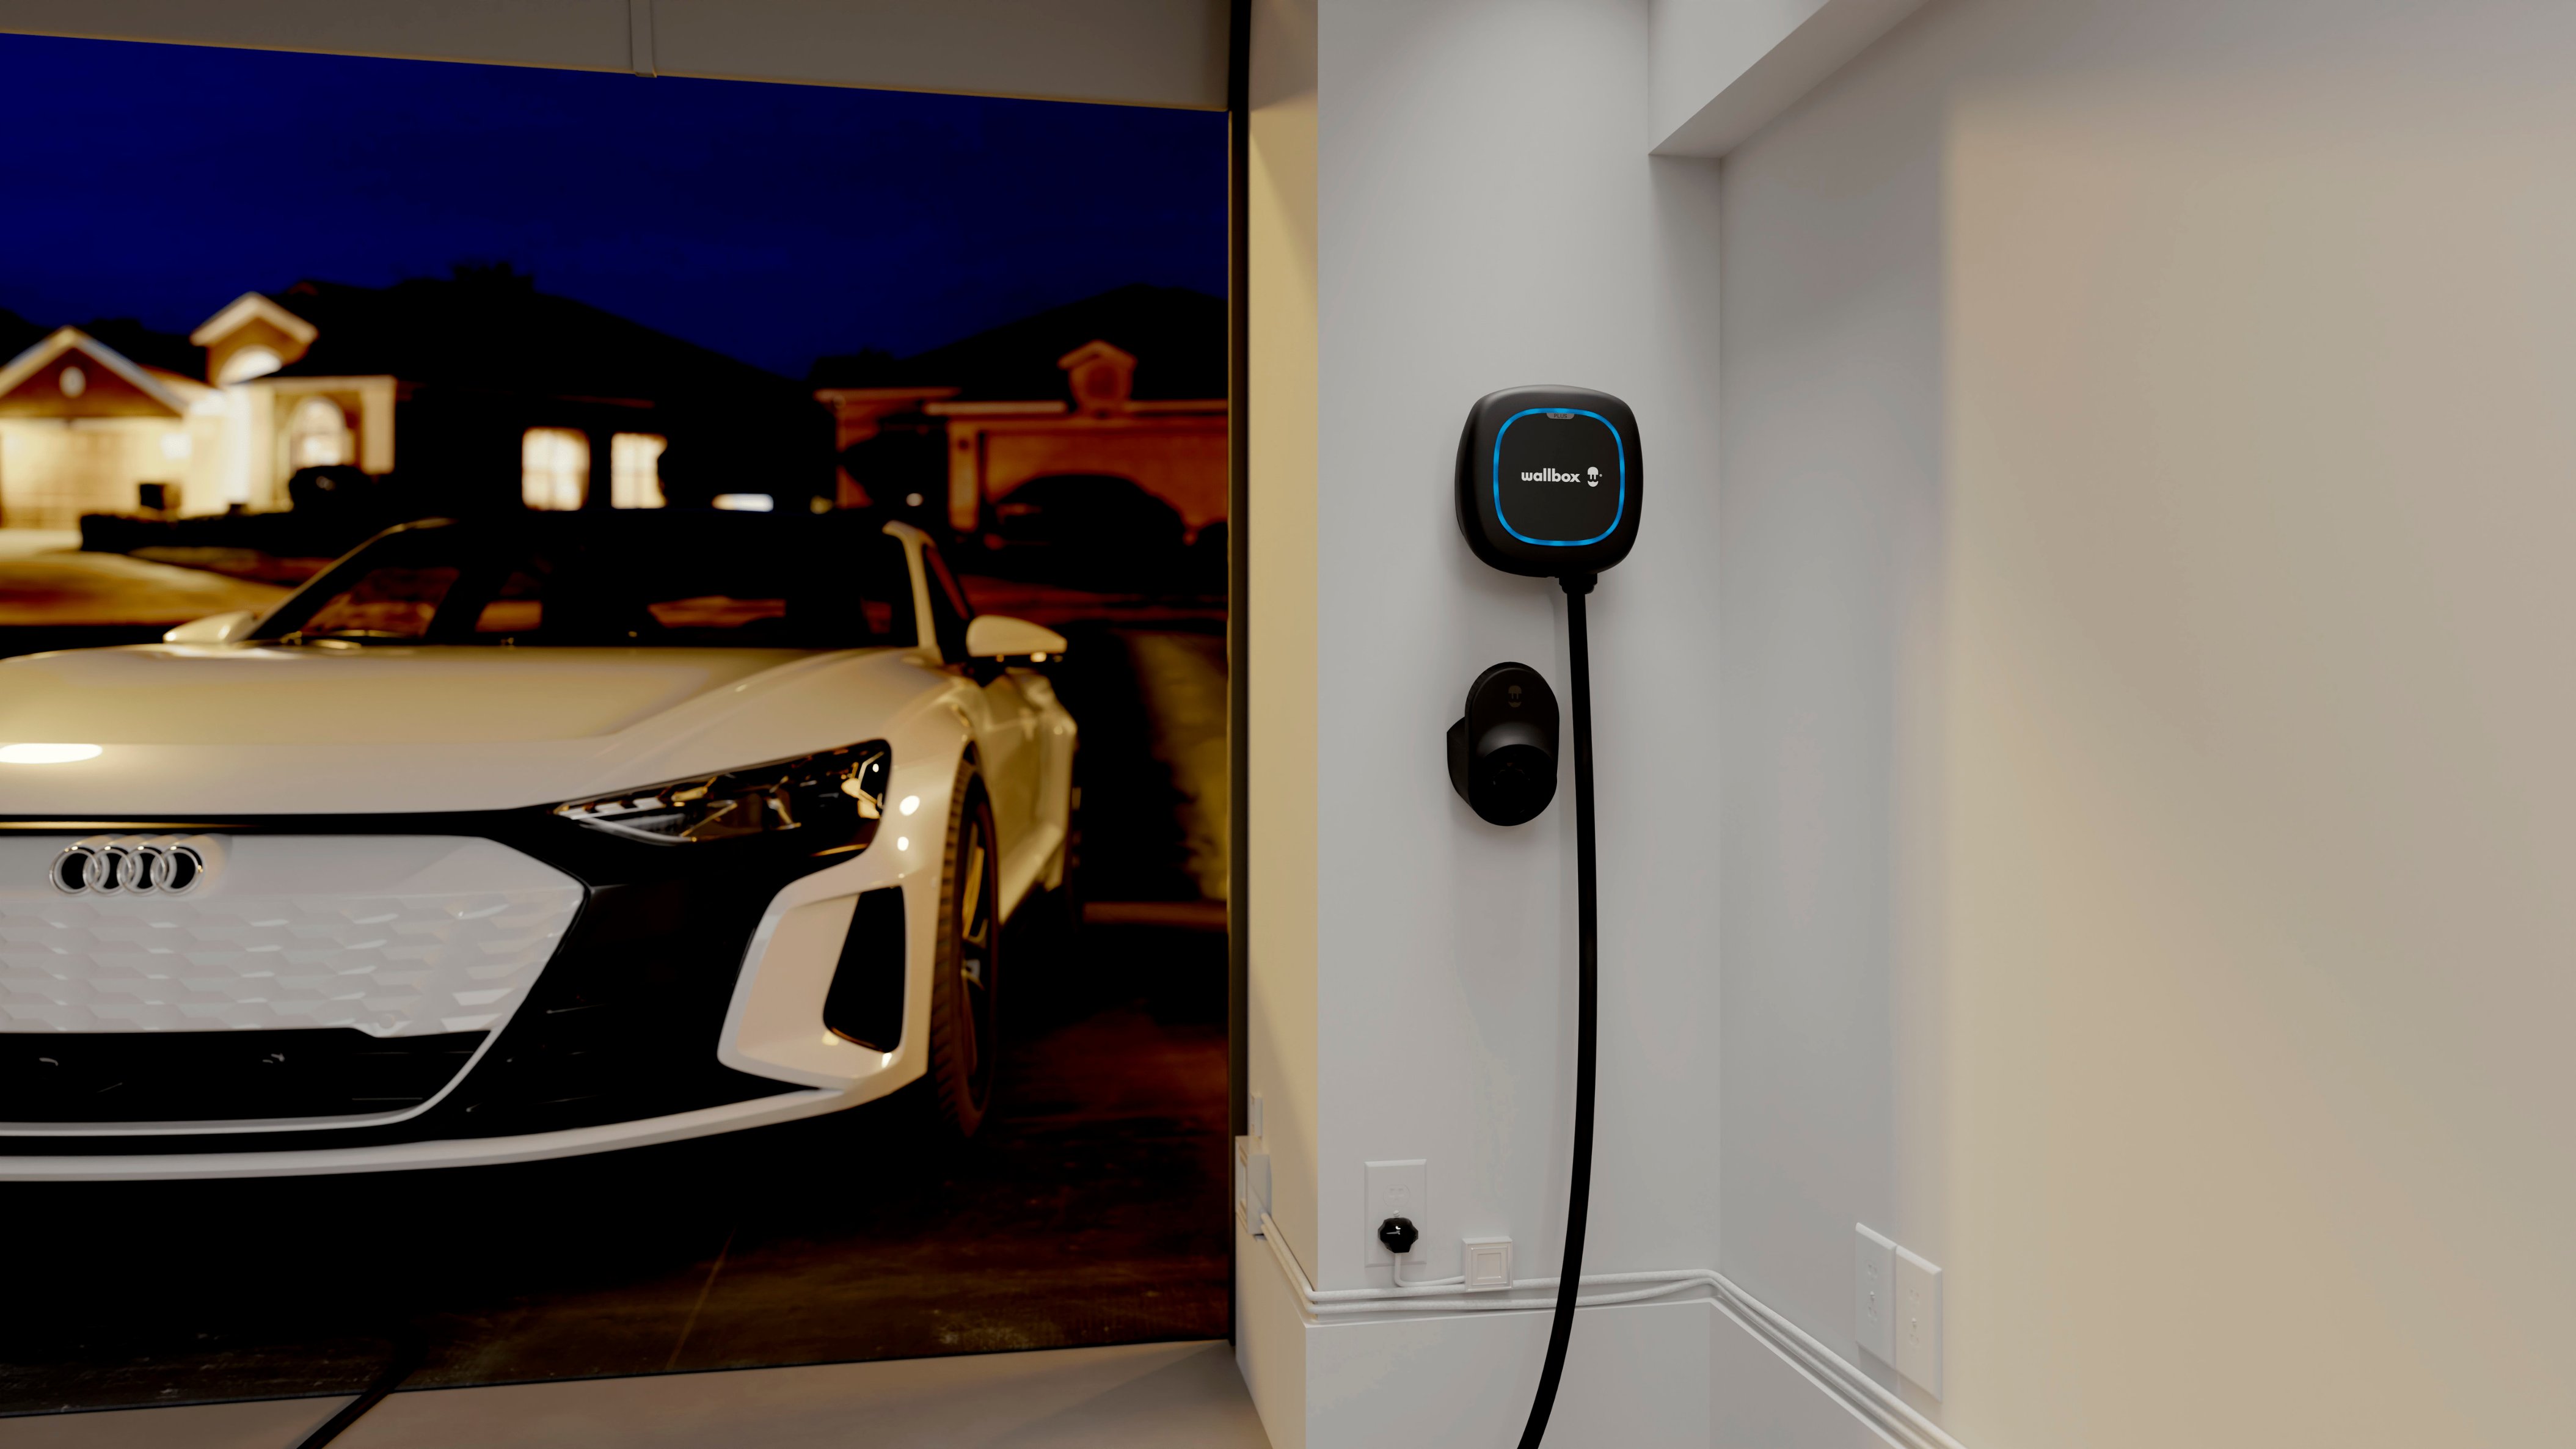 Wallbox Pulsar Plus EV Charger, 22 kW, 5m Cable, Type 2 connector, Black -  charging stations for electric vehicles